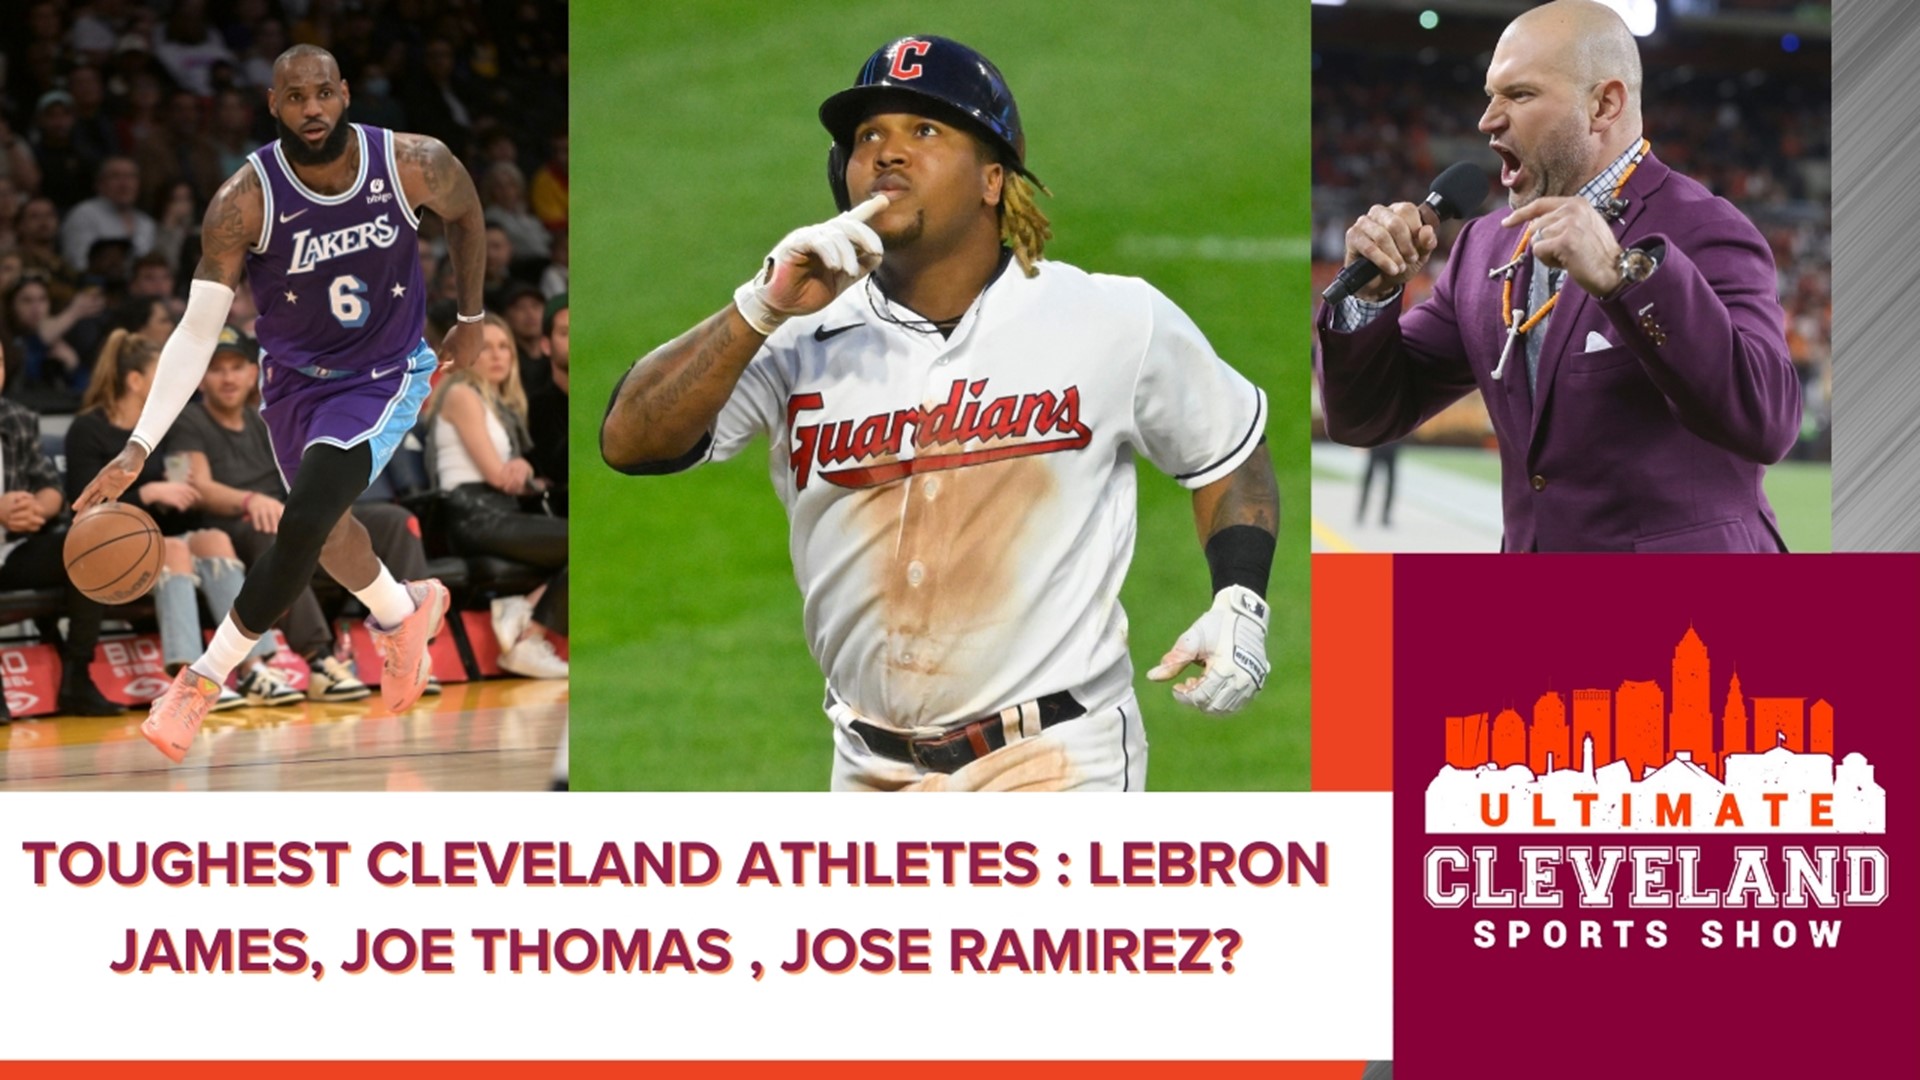 The guys discuss who the toughest athletes are of all-time in Cleveland. Joe Thomas, Tristan Thompson, Ernest Byner, Larry Doby, Lebron James, Joe Charbonneau + more